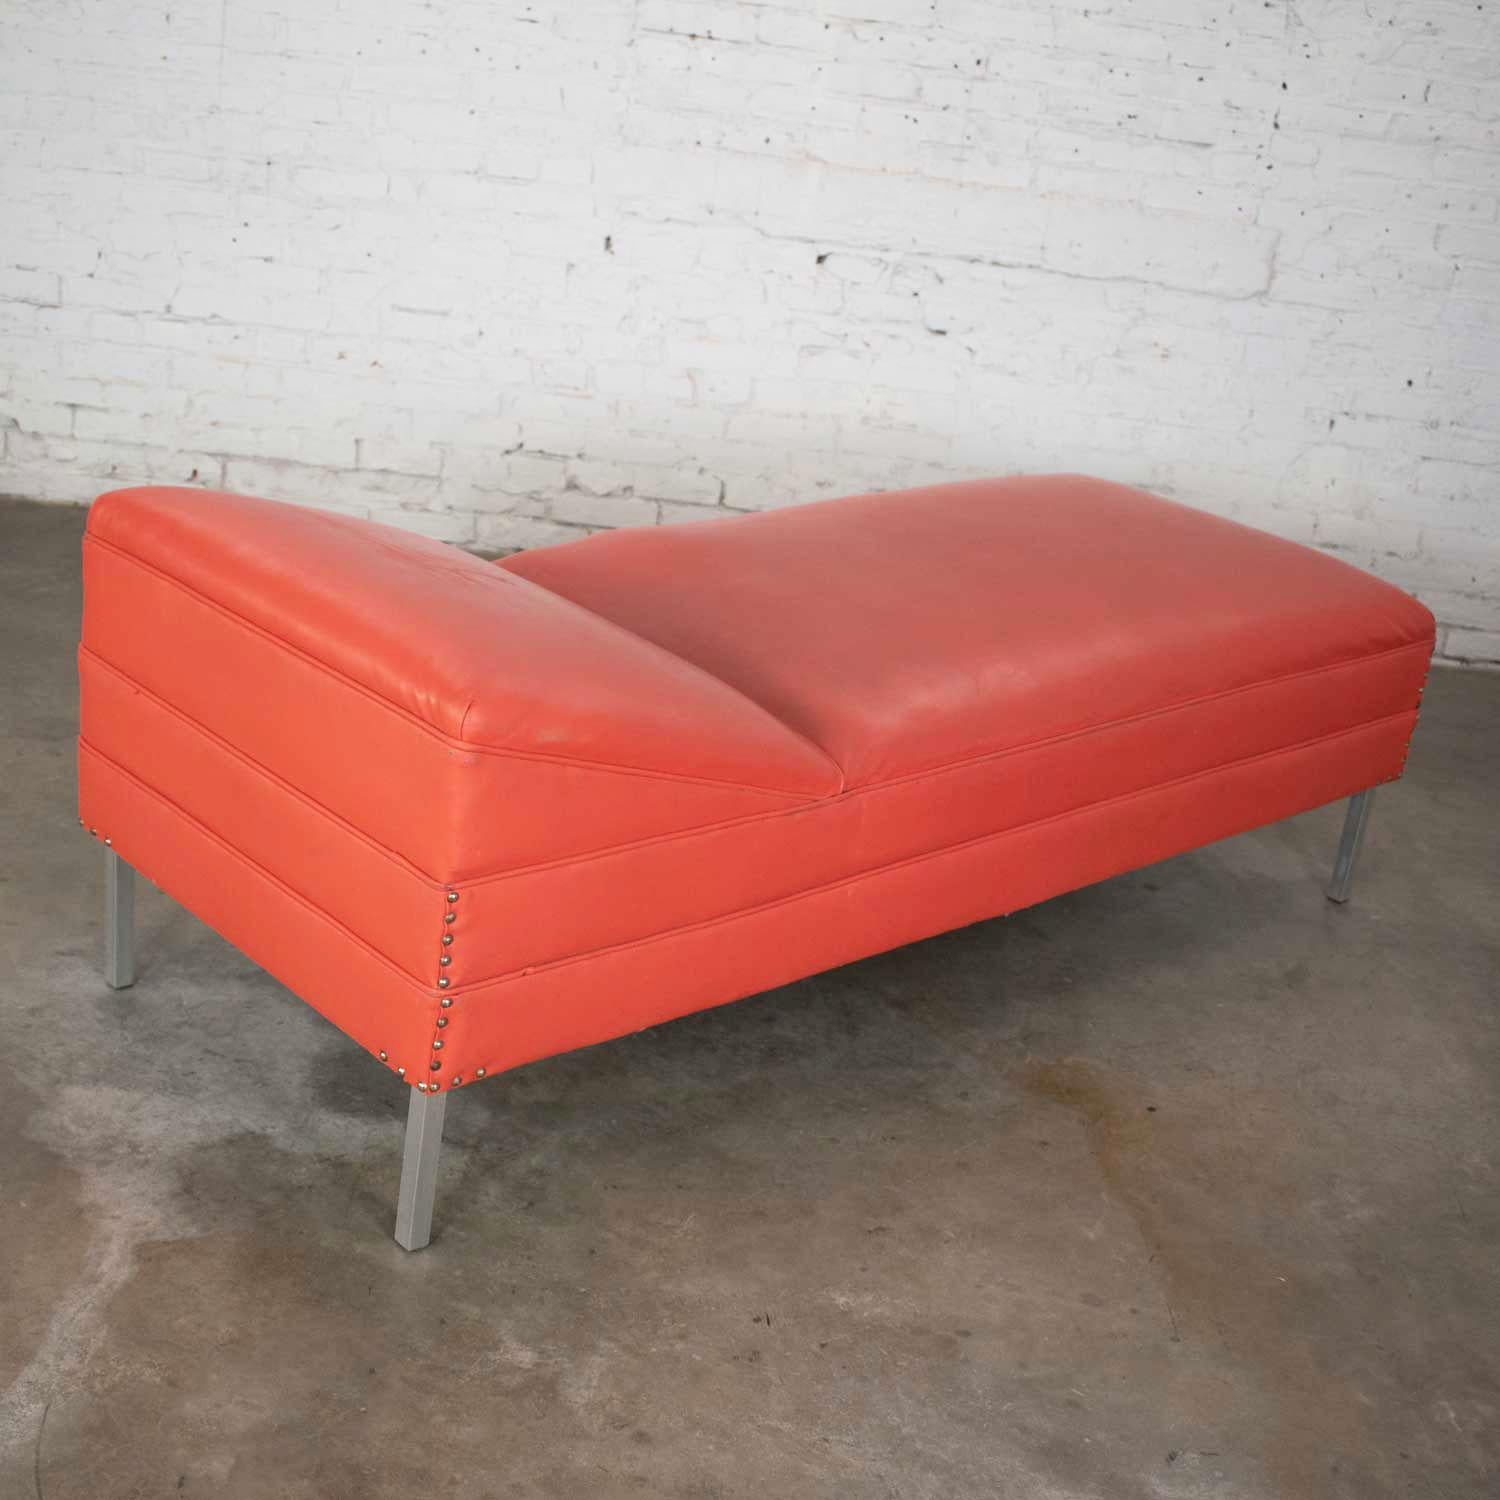 American Mid-Century Modern Chaise or Day Bed in Coral Vinyl Faux Leather Aluminum Legs For Sale